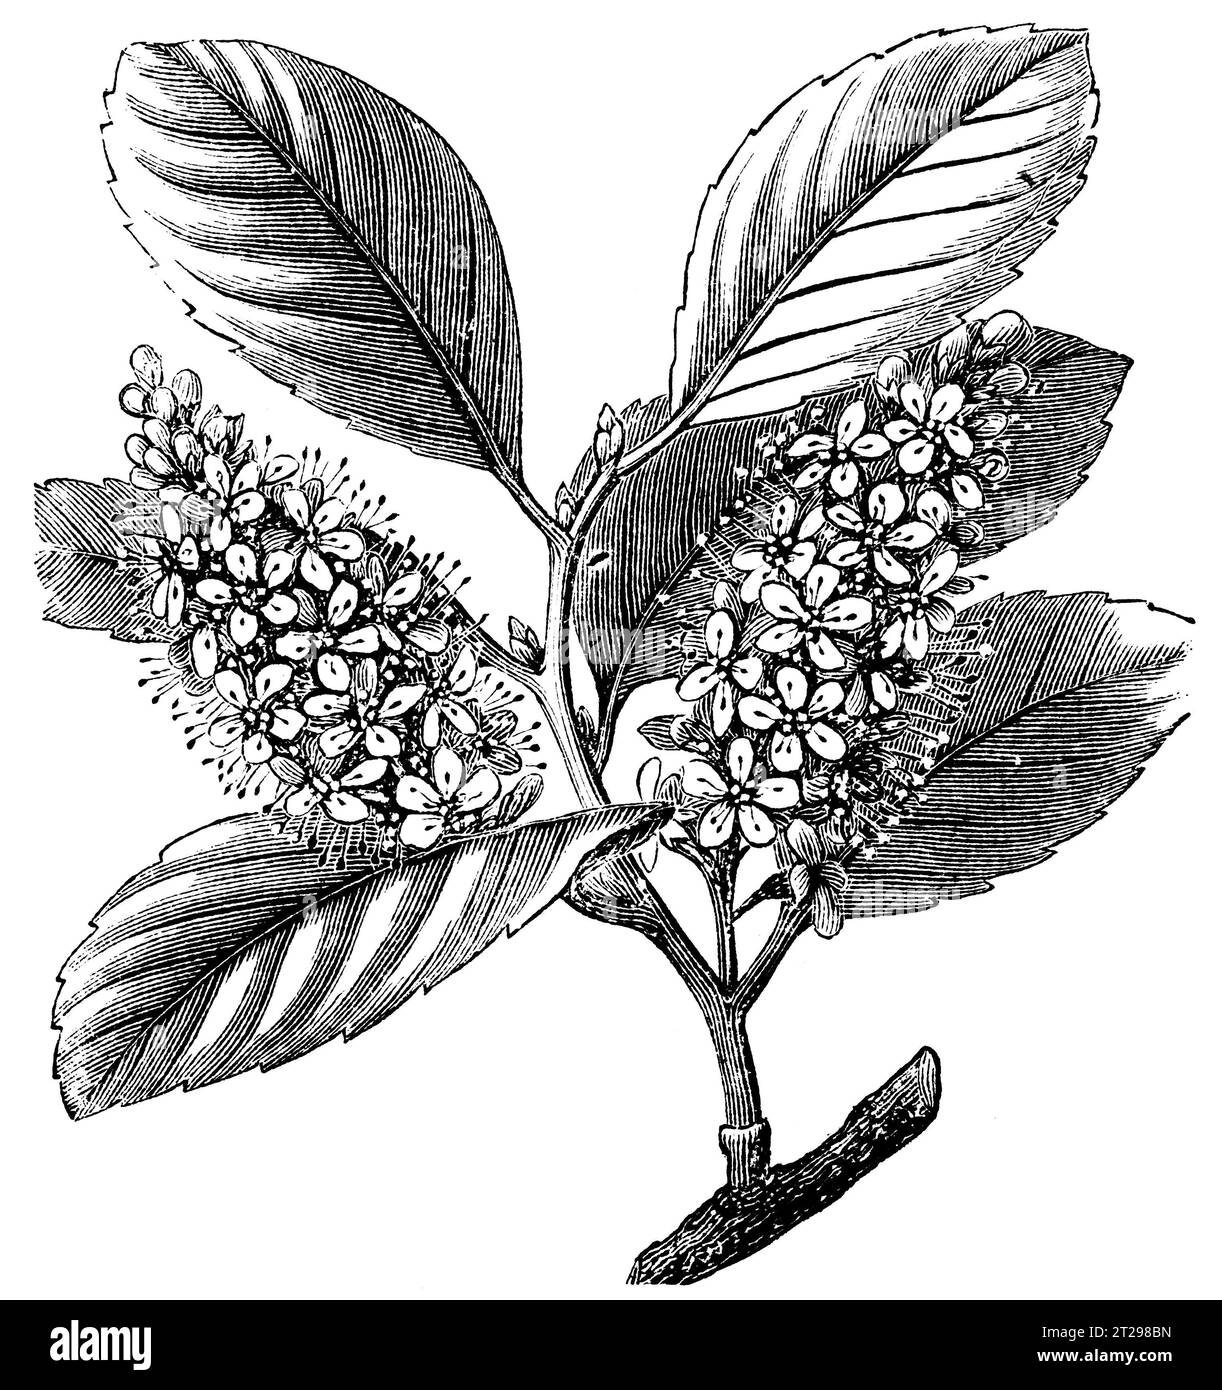 Prunus laurocerasus, digitally restored illustration from 'The Condensed American Encyclopedia', published in the 19th century. Stock Photo